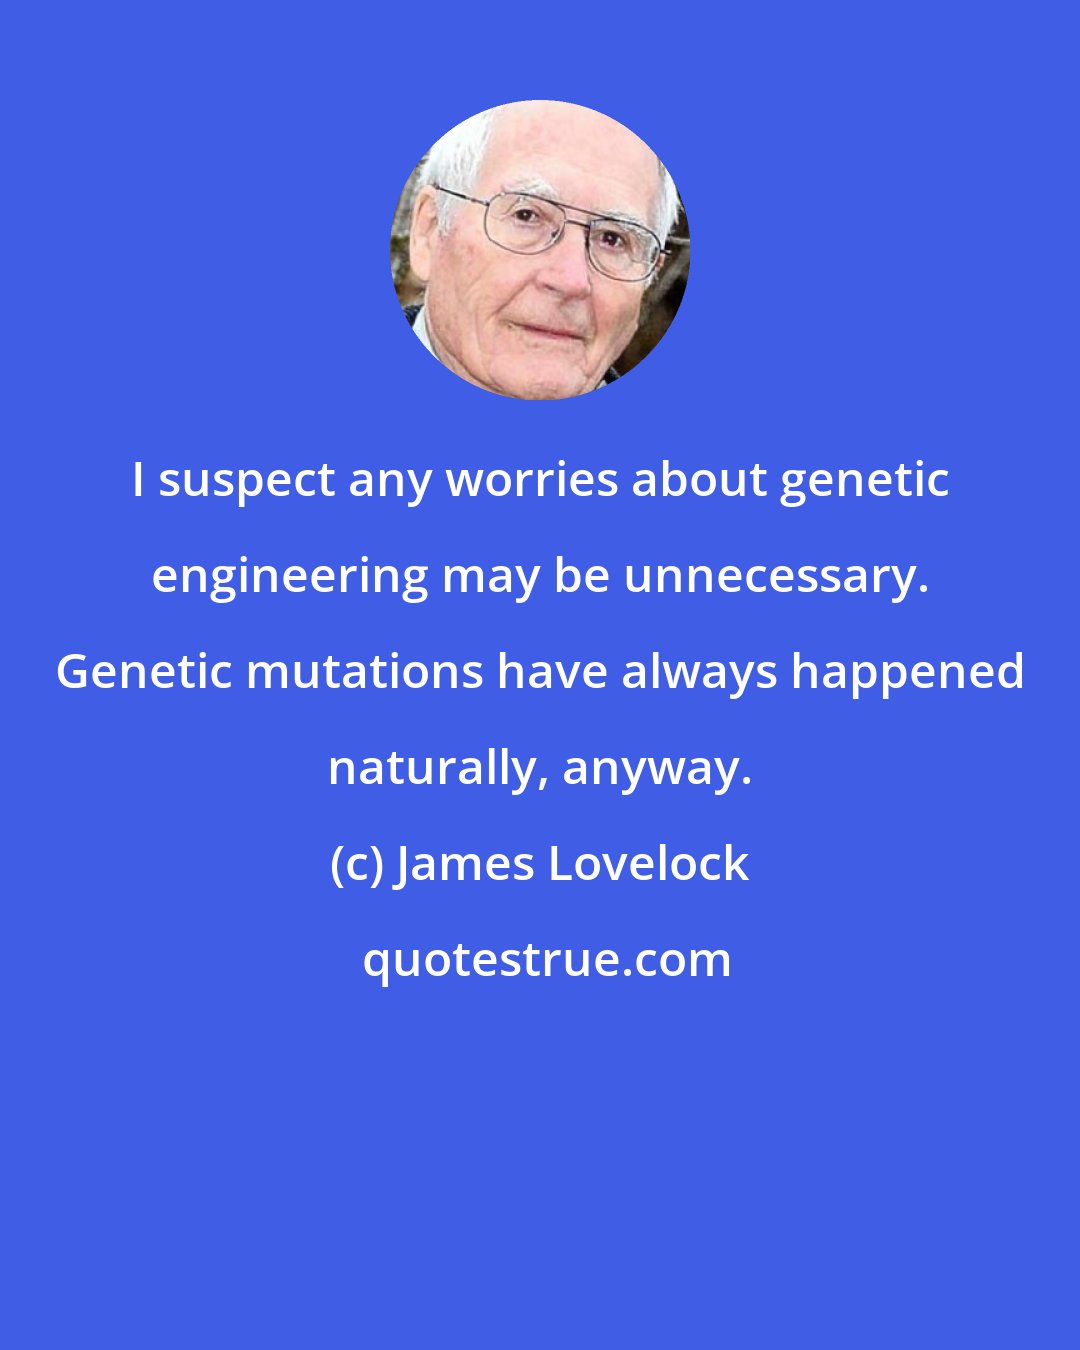 James Lovelock: I suspect any worries about genetic engineering may be unnecessary. Genetic mutations have always happened naturally, anyway.